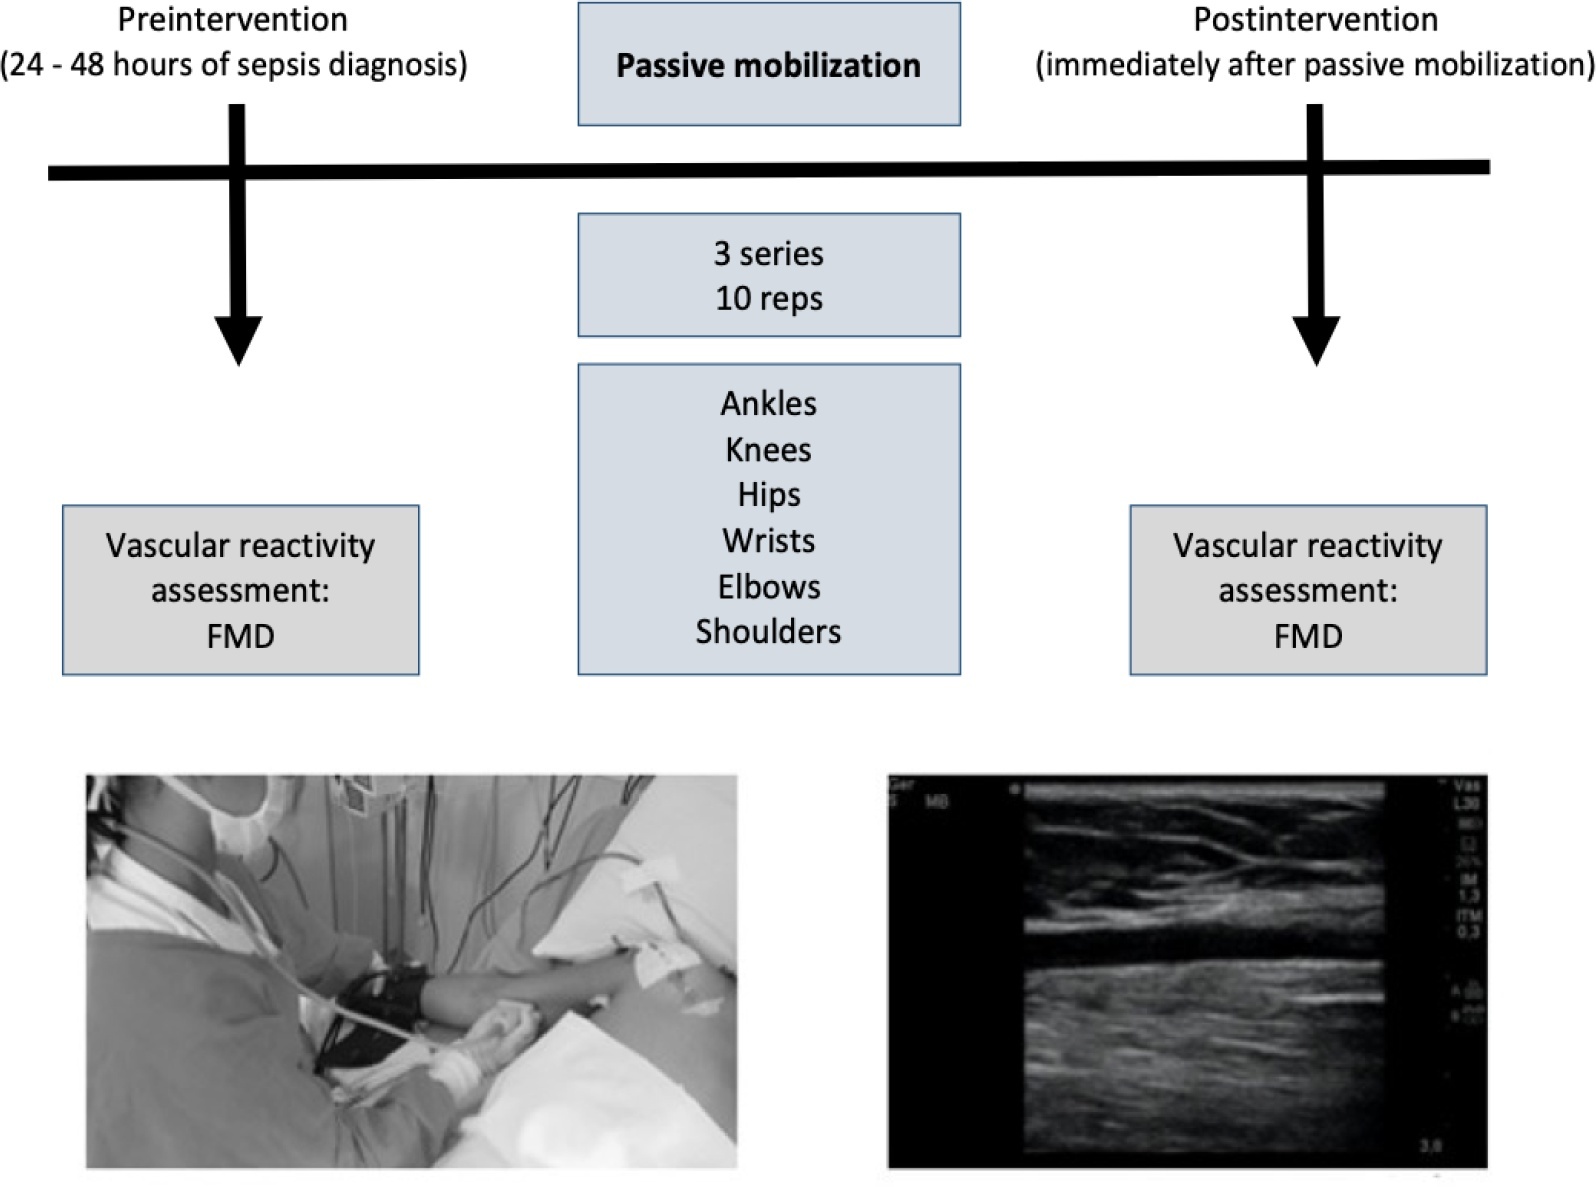 Early passive mobilization increases vascular reactivity response in critical patients with sepsis: a quasi-experimental study